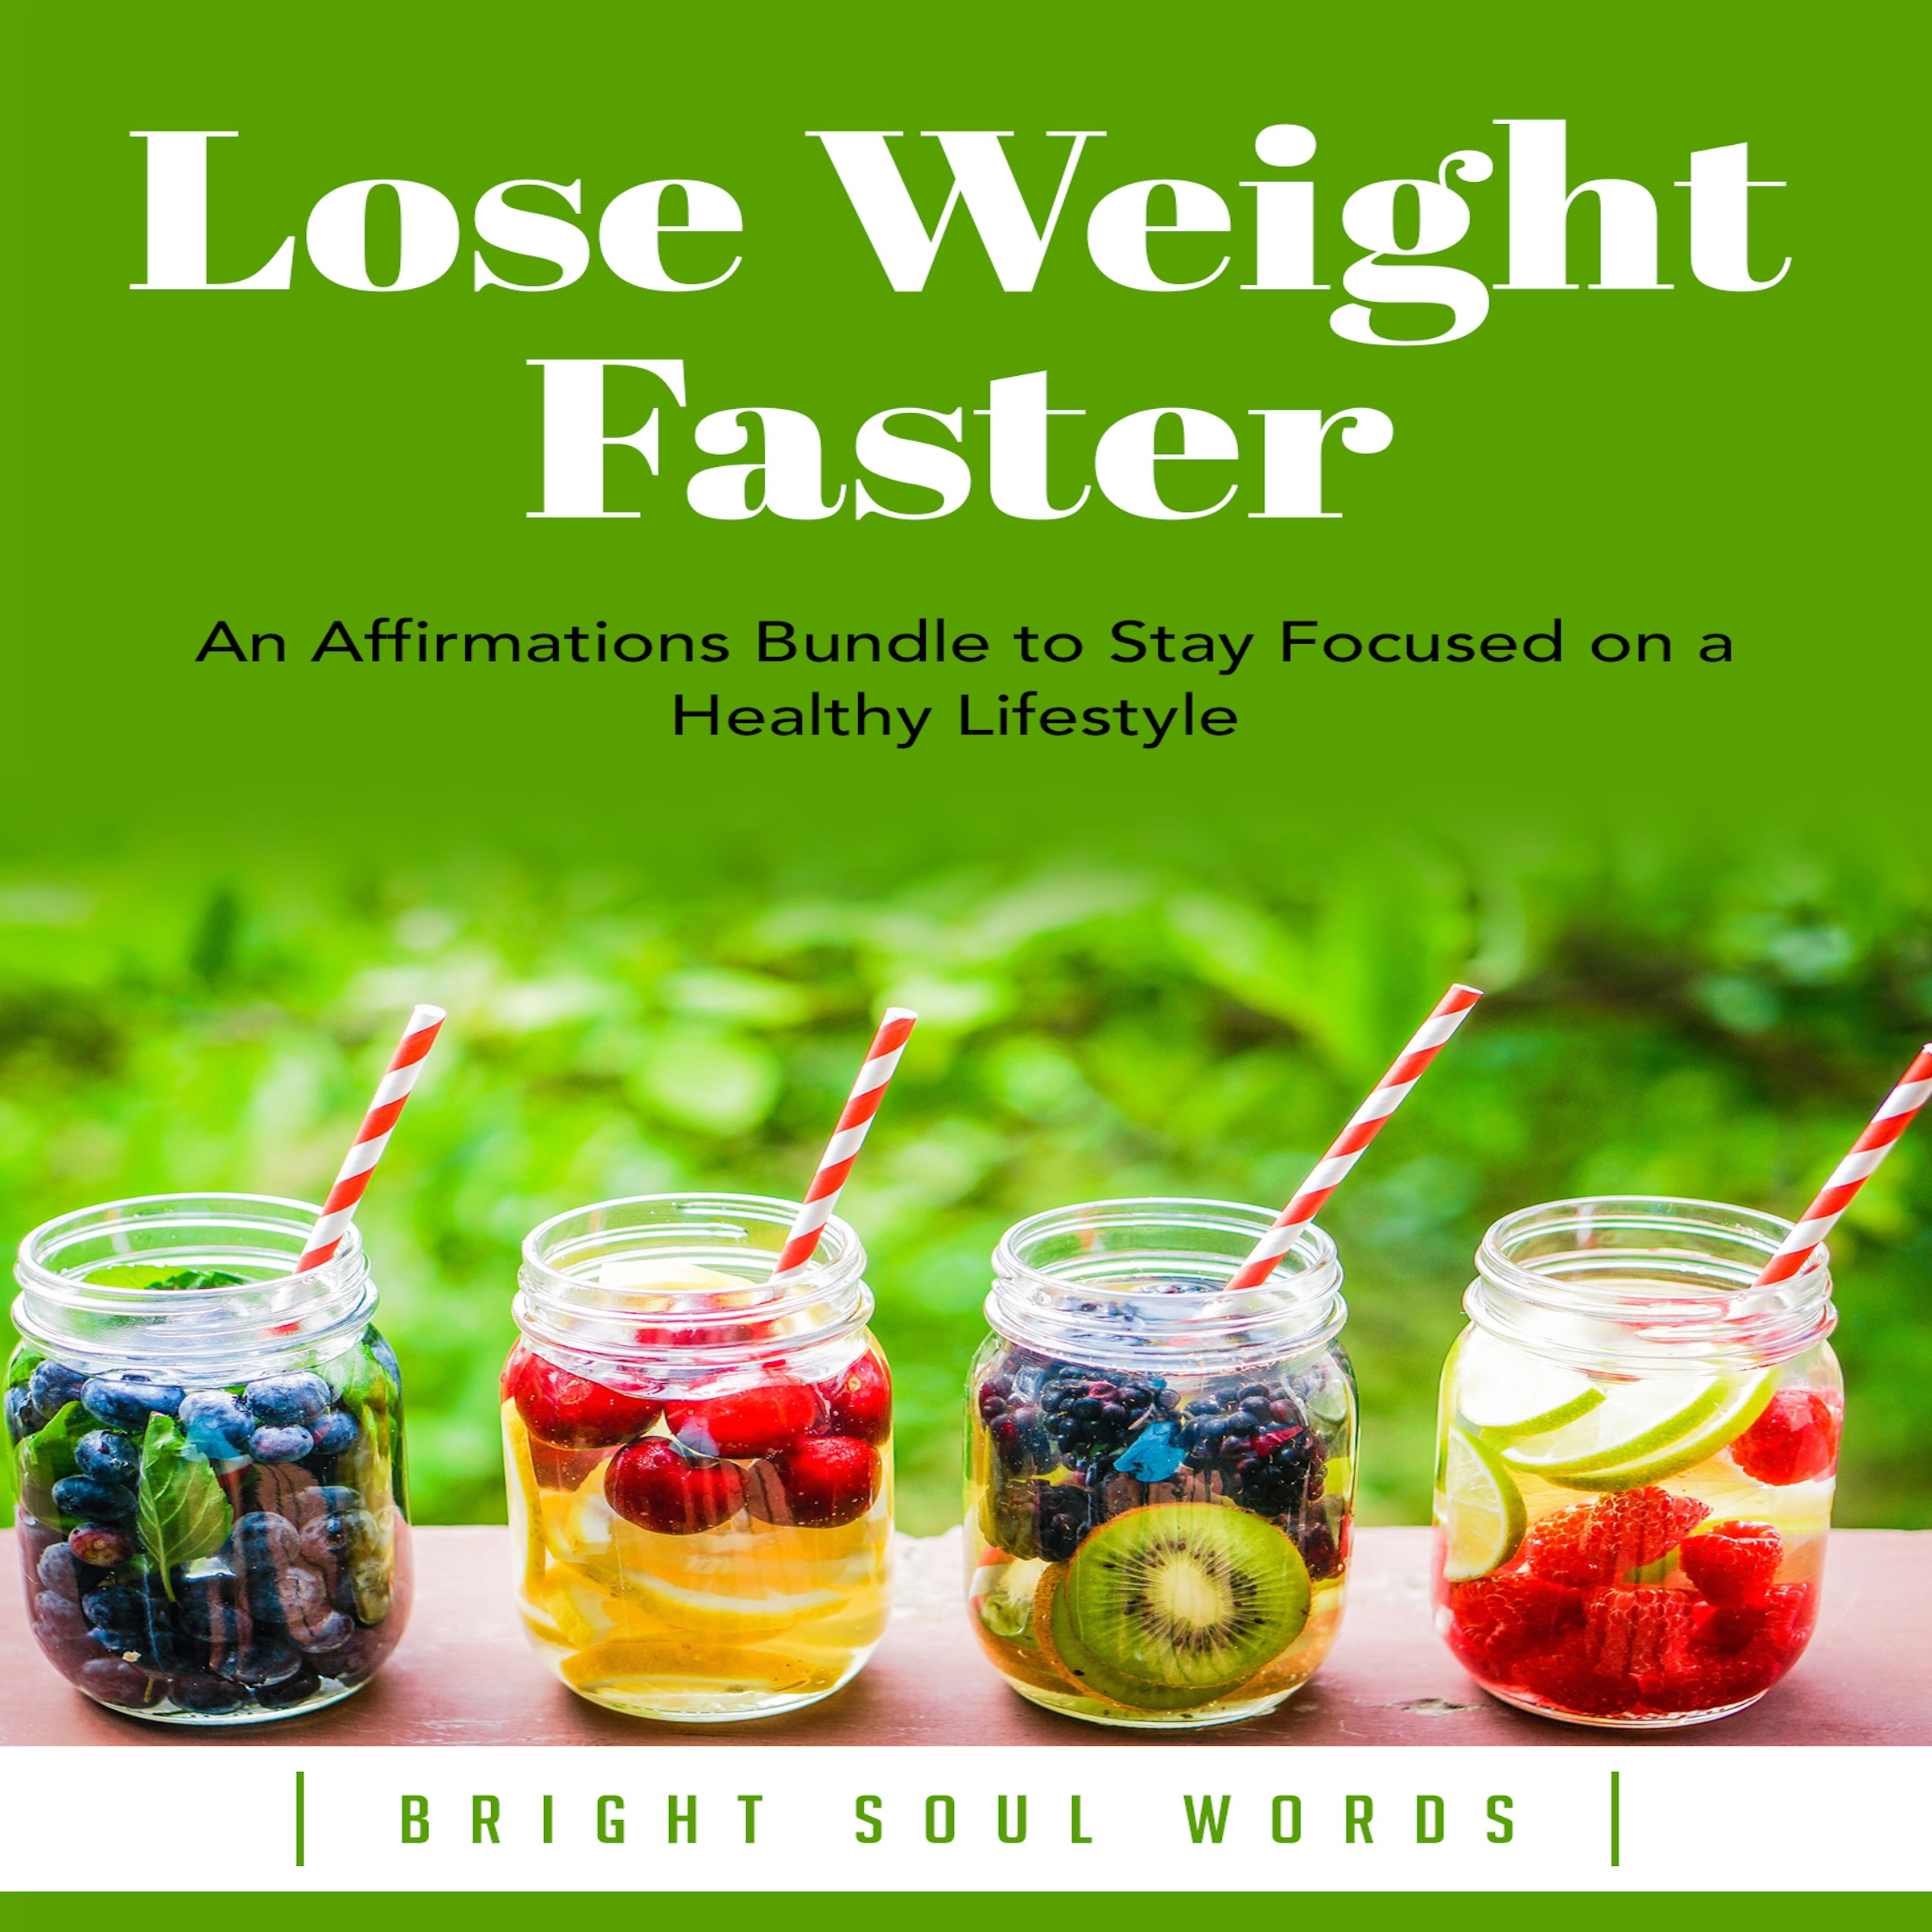 Lose Weight Faster: An Affirmations Bundle to Stay Focused on a Healthy Lifestyle Audiobook by Bright Soul Words